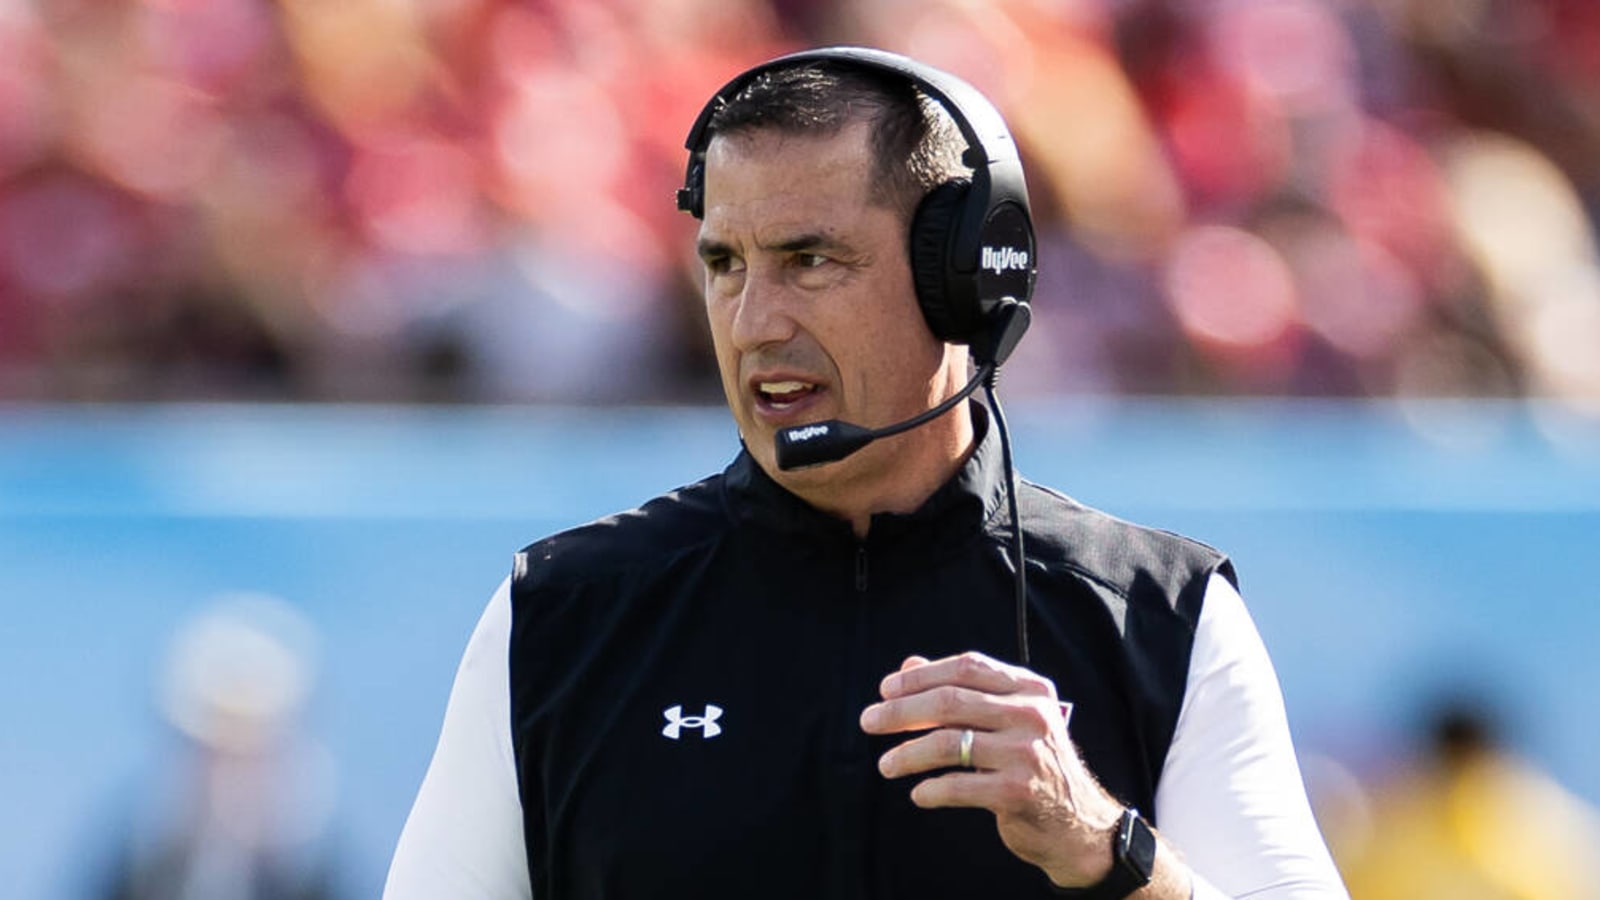 Fickell seems to be anticipating rocky 'changes' at Wisconsin